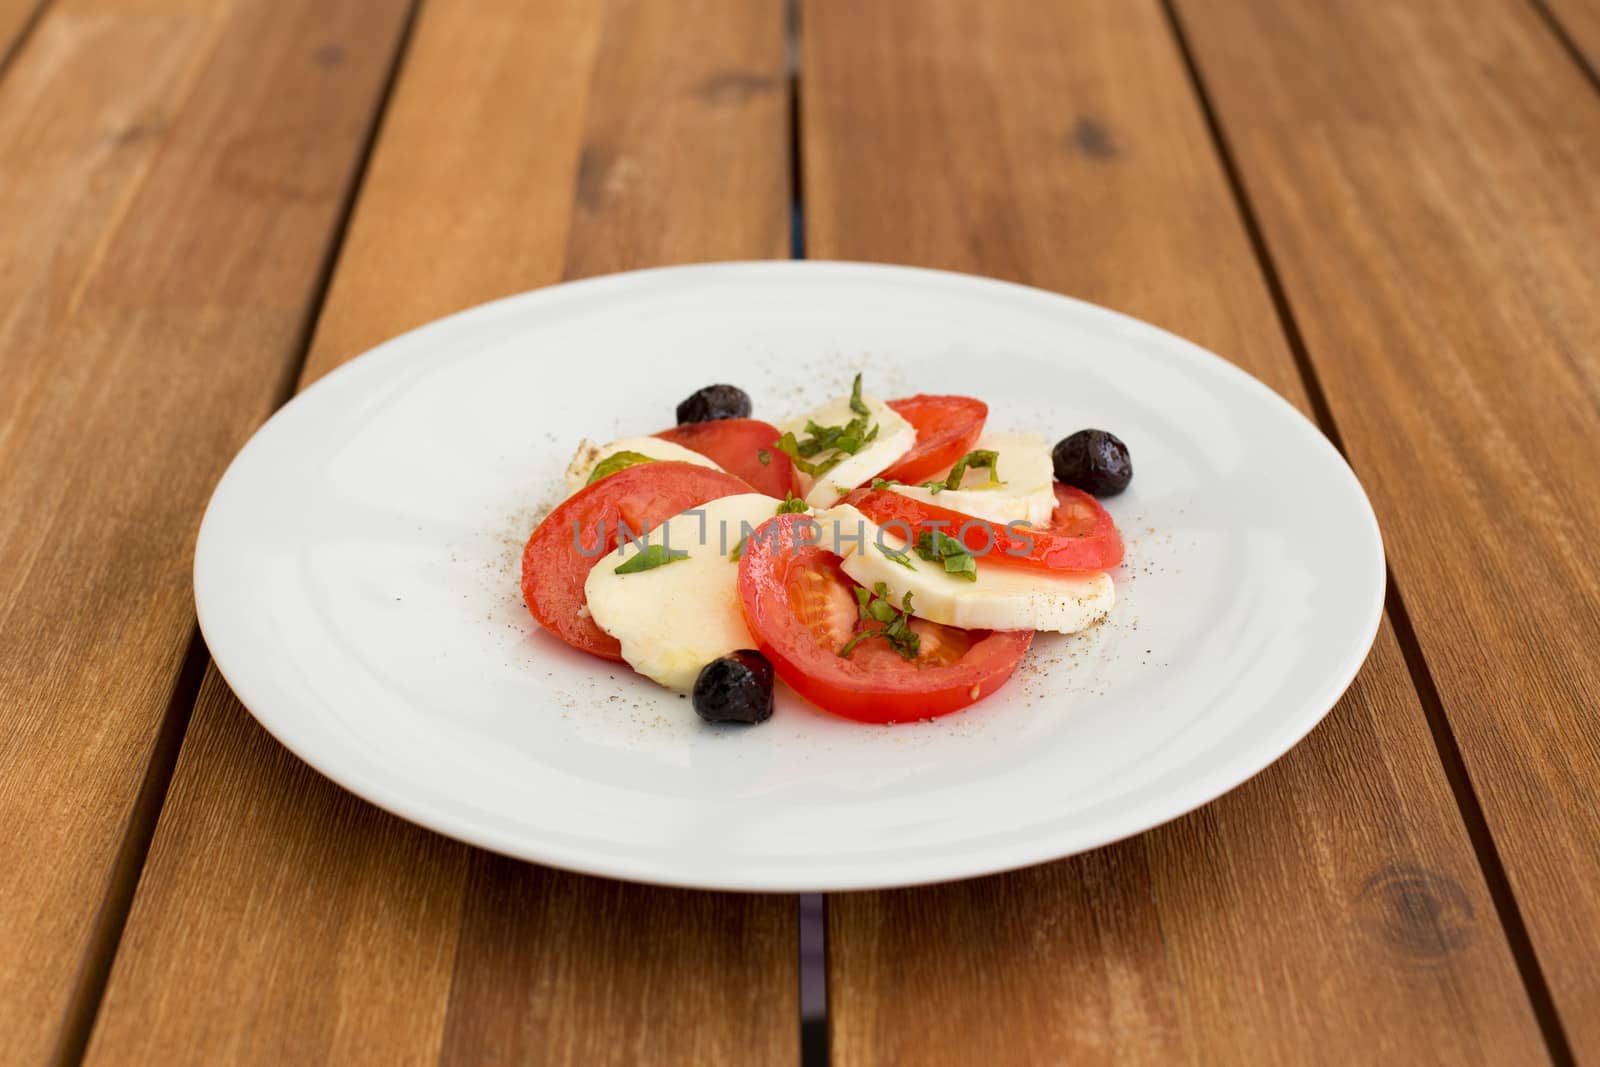 Fresh mozzarella, tomatoes salad in white plate on a wooden table.